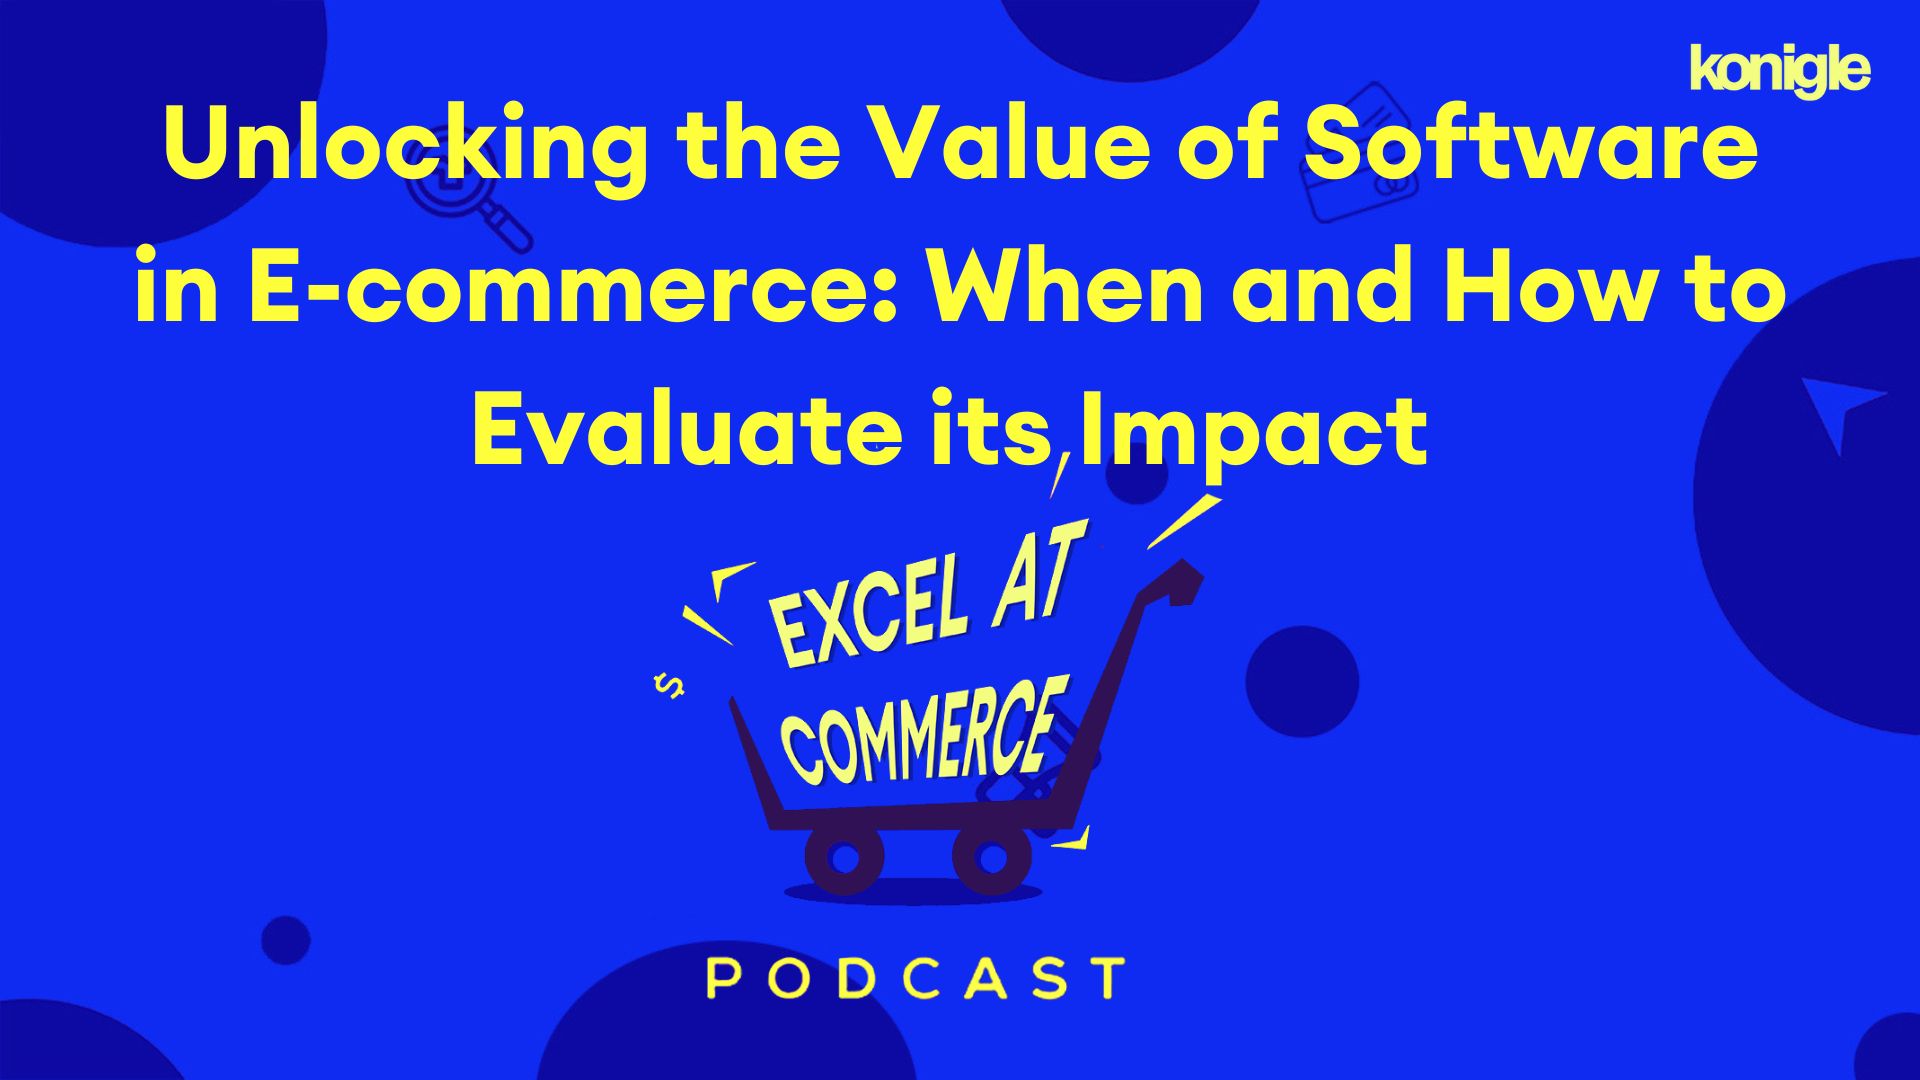 Unlocking the Value of Software in E-commerce: When and How to Evaluate its Impact